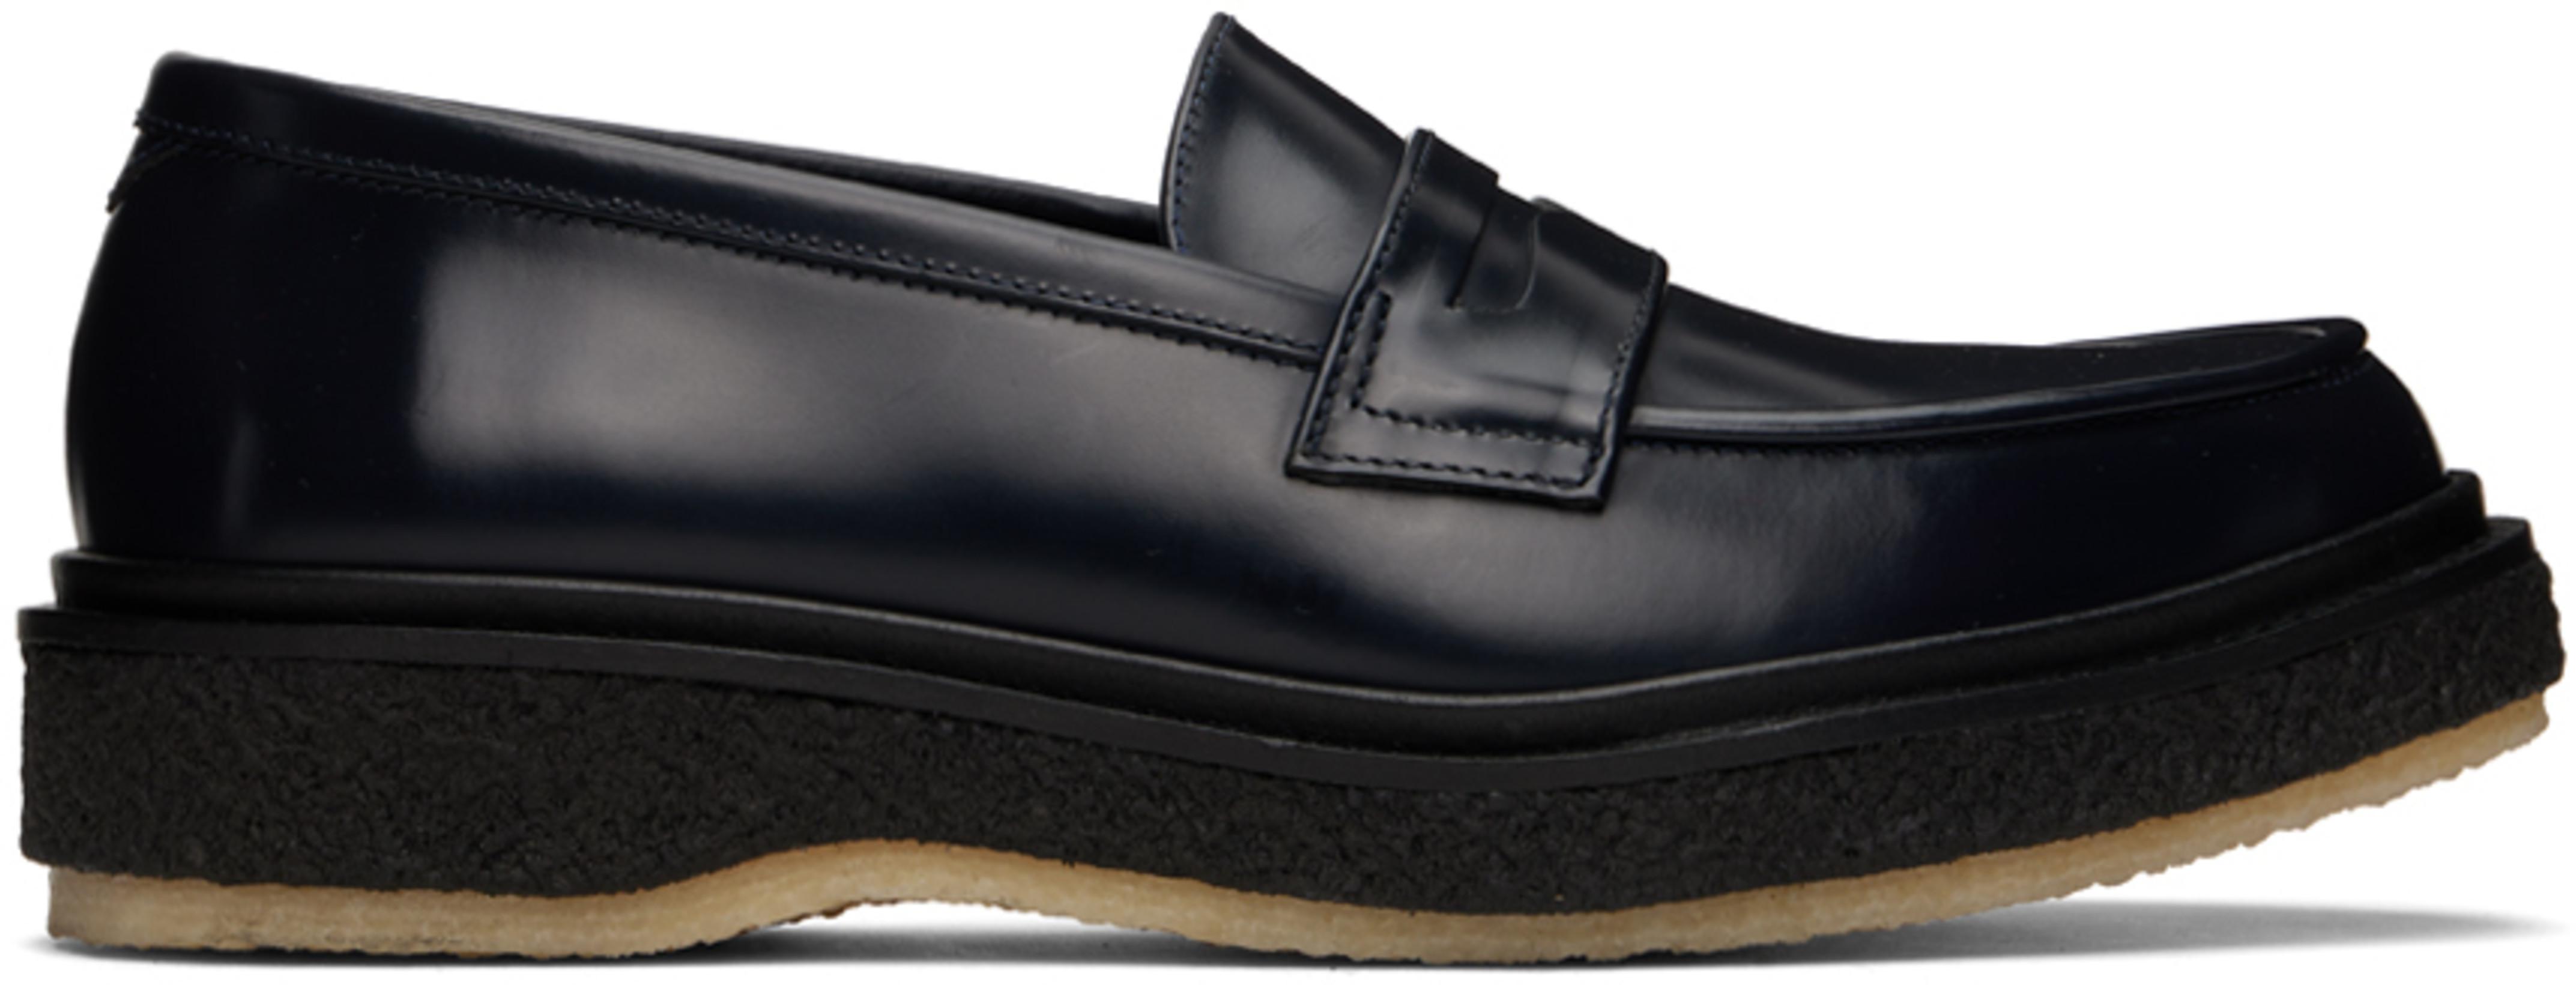 Navy Type 5 Loafers by ADIEU PARIS